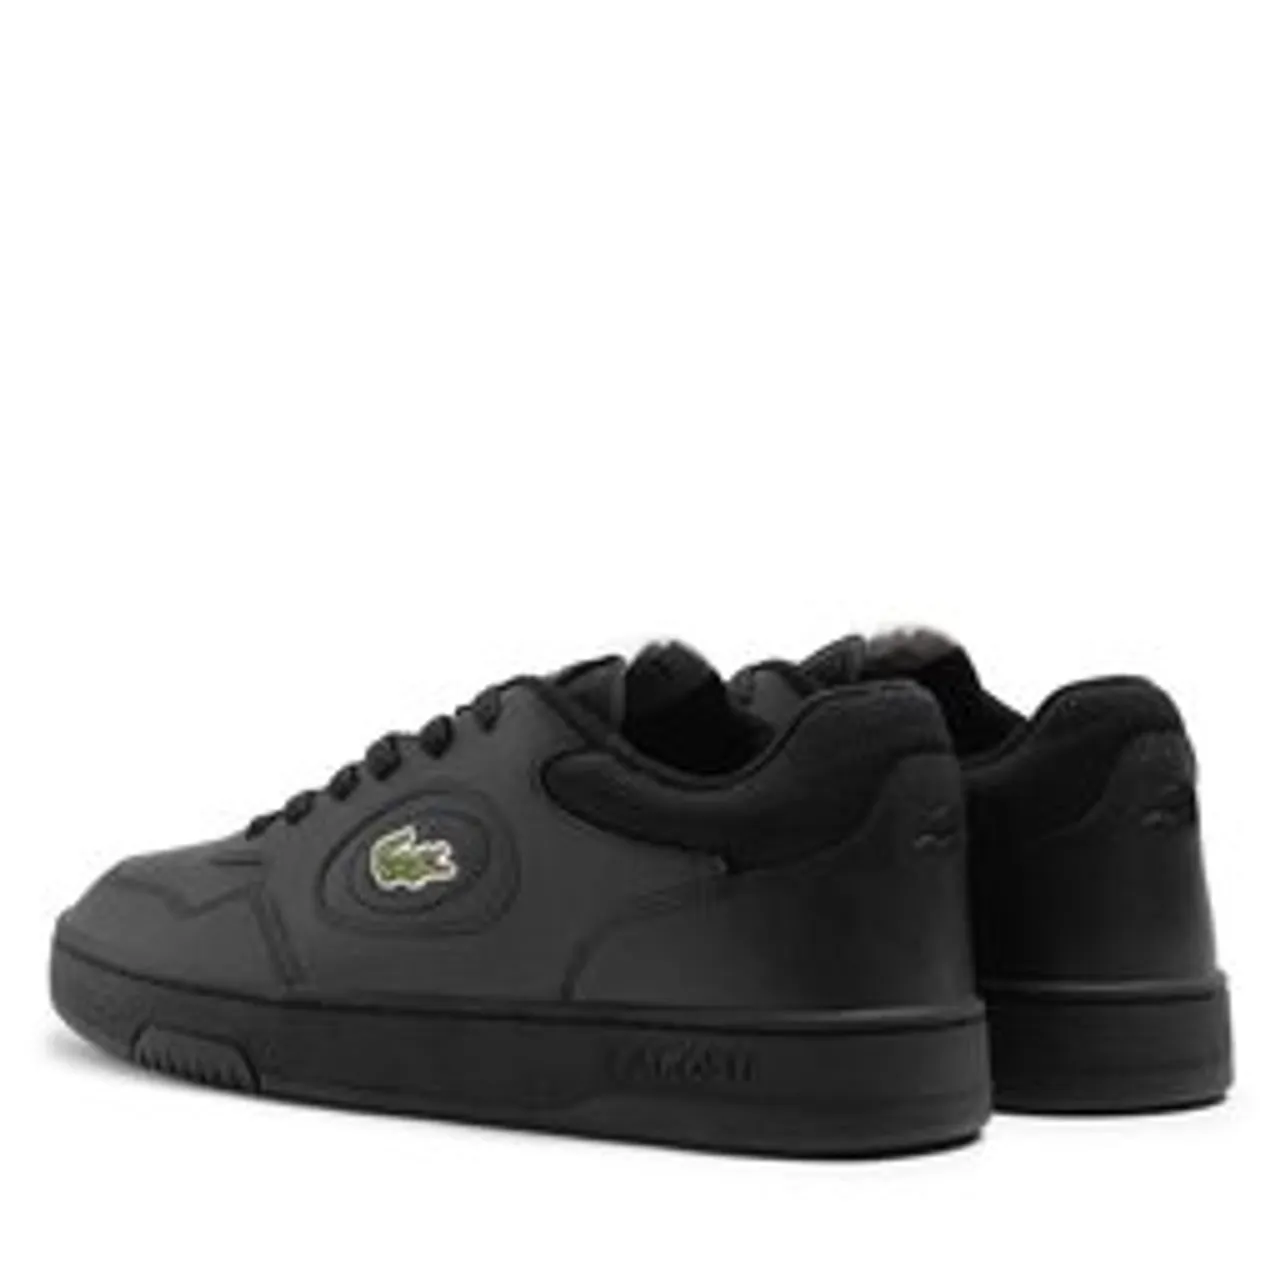 Sneakers Lacoste Lineset 746SMA0045 Blk/Blk 02H